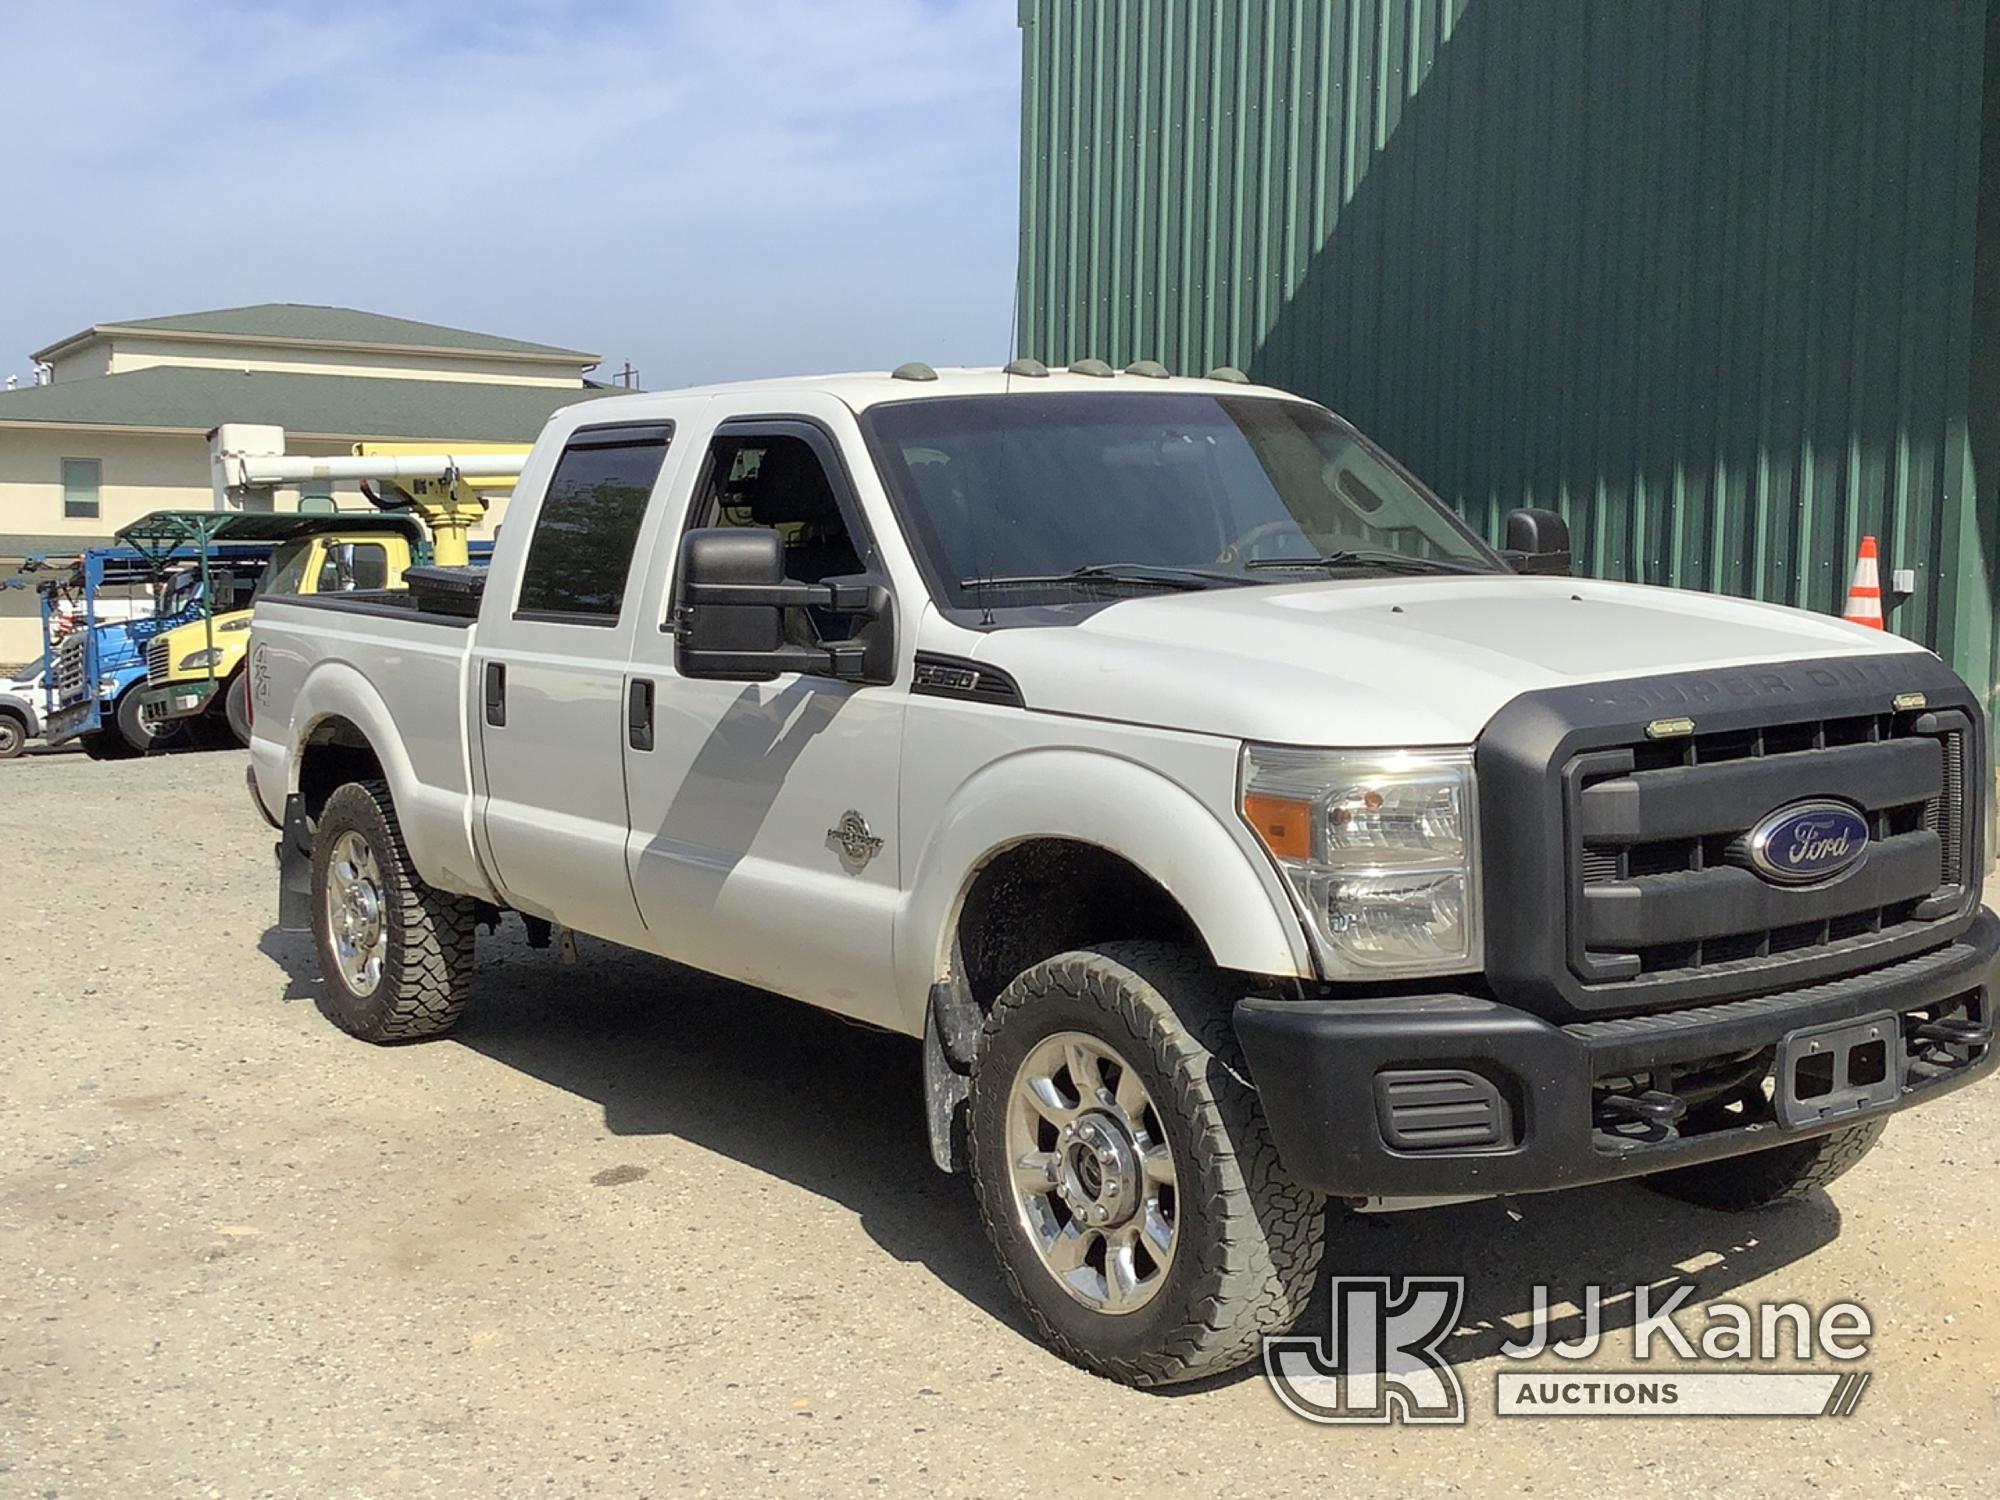 (Harmans, MD) 2012 Ford F350 4x4 Crew-Cab Pickup Truck Runs & Moves, Check Engine Light On, Uneven T